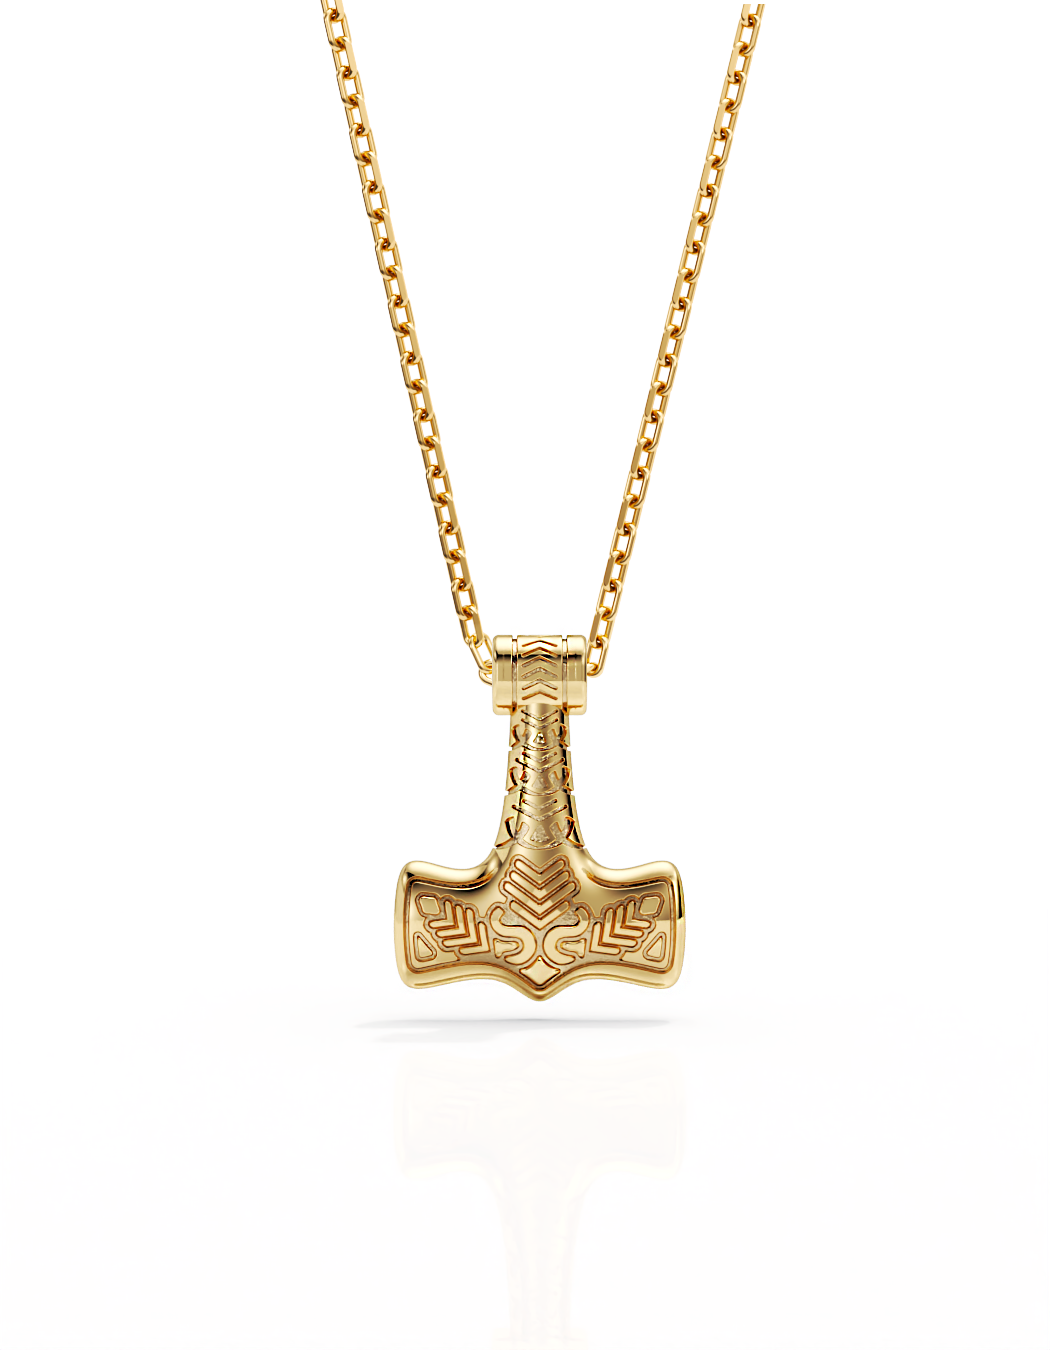 Elephant Hammer Necklace 14k Gold - Small